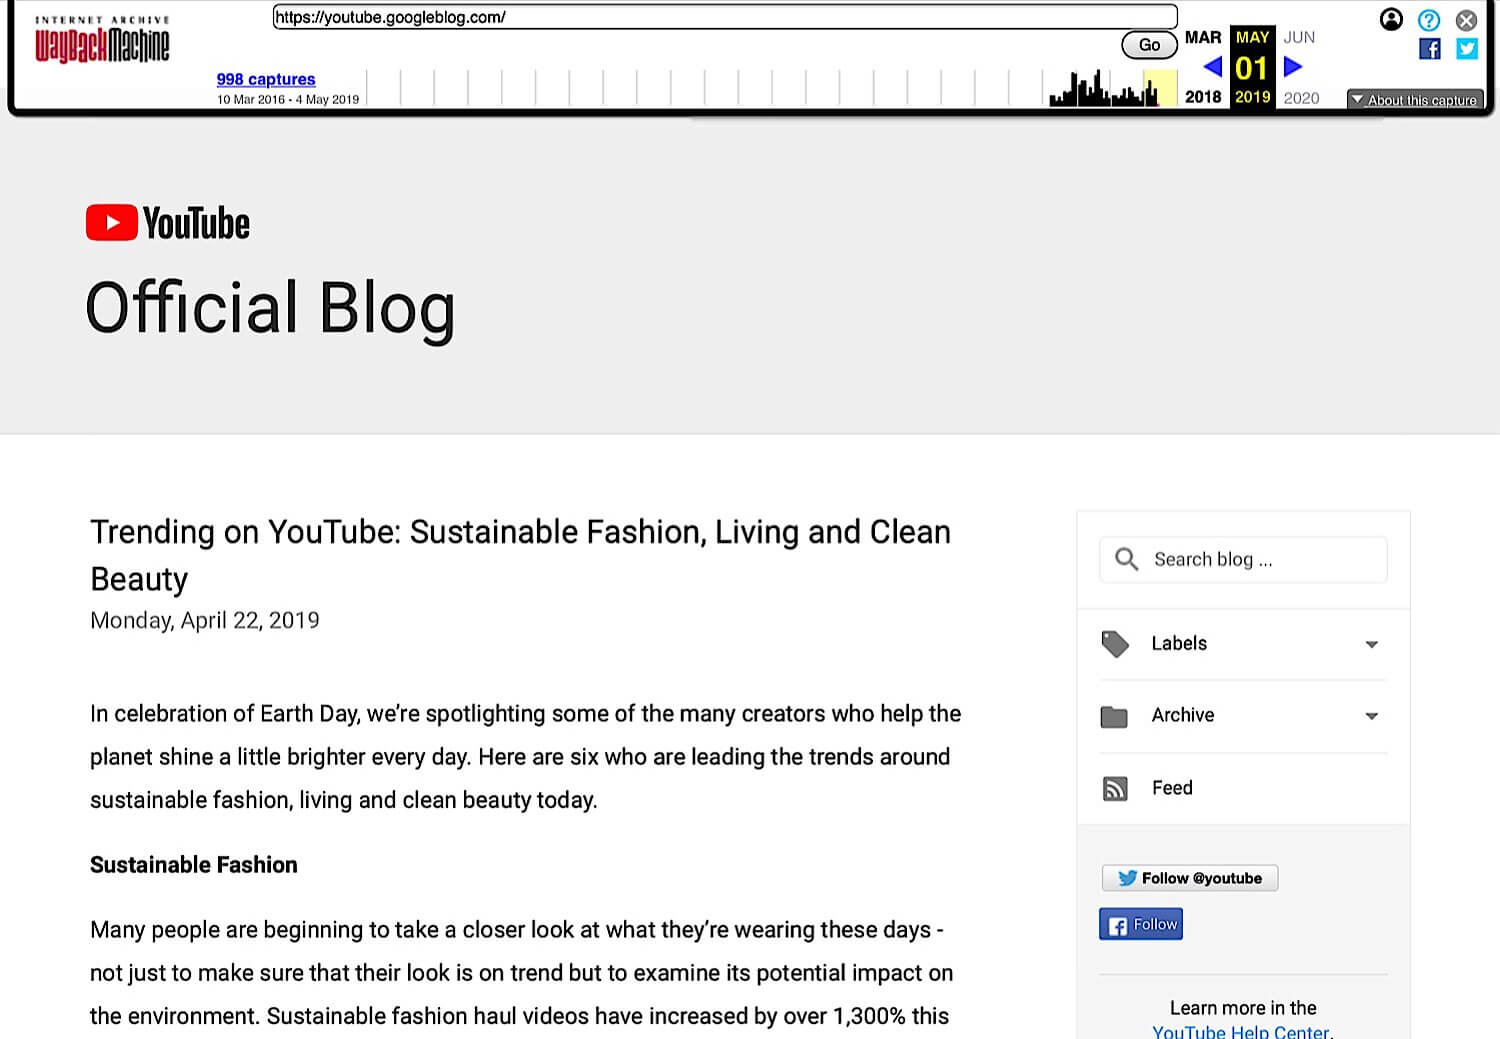 An archive of the official YouTube blog from May 1, 2019 with the tagline “Broadcast Yourself” removed.